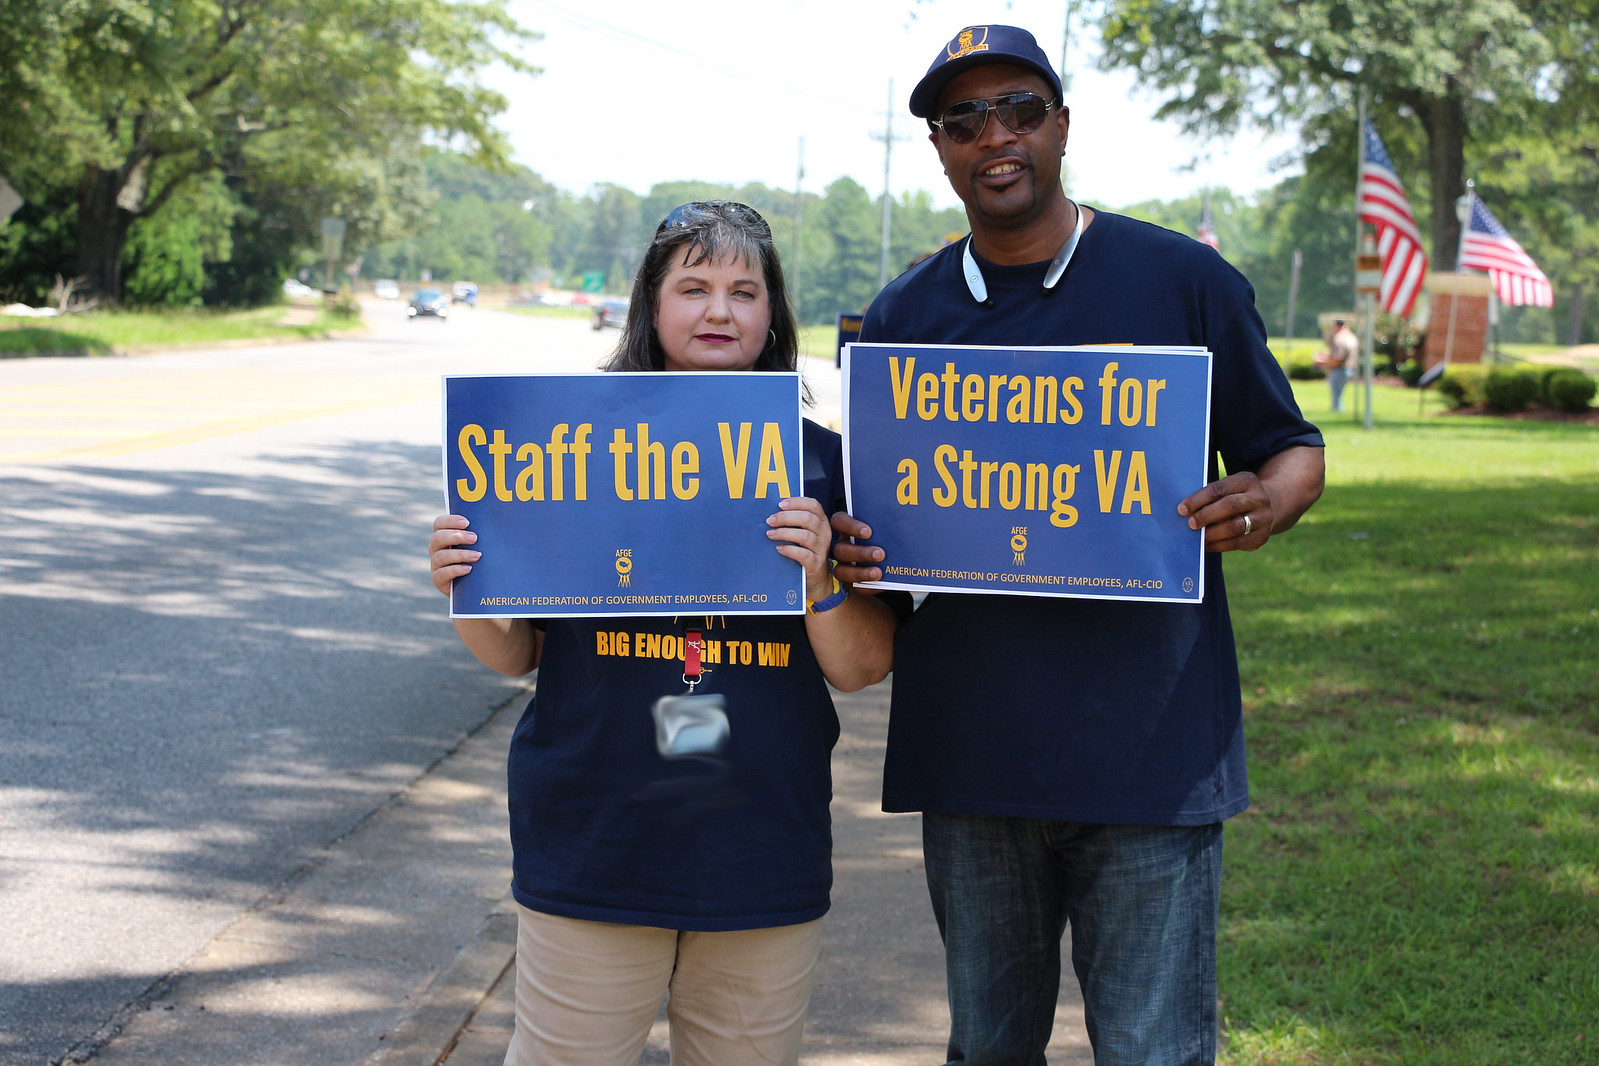 The VA needs to be strong to keep our veterans strong and healthy